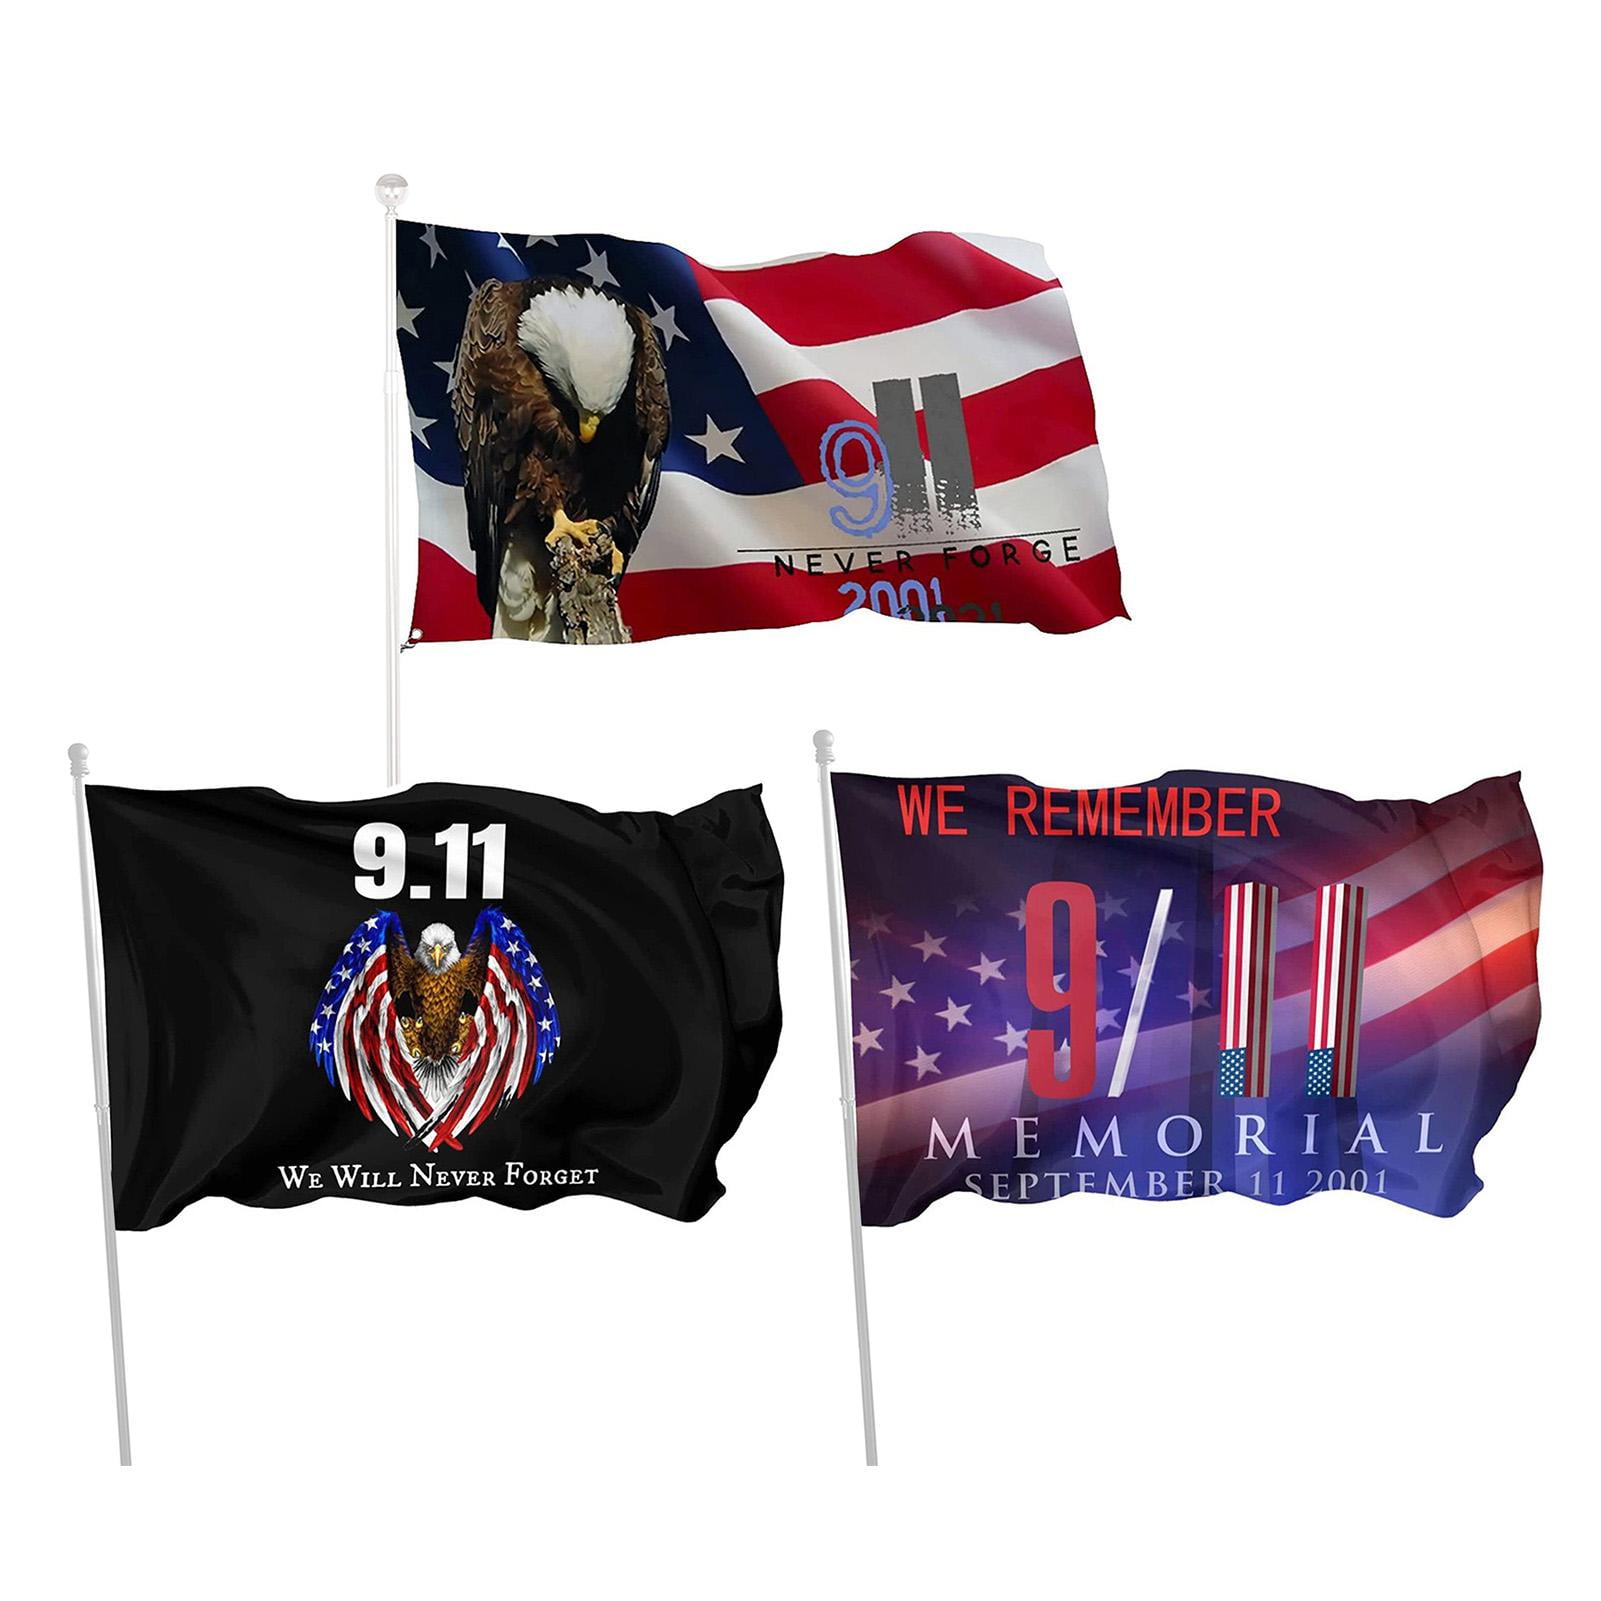 No Forgetting Flag 9/11 3x5ft USA American Never Forget 9-11 Memorial Sept 11th 